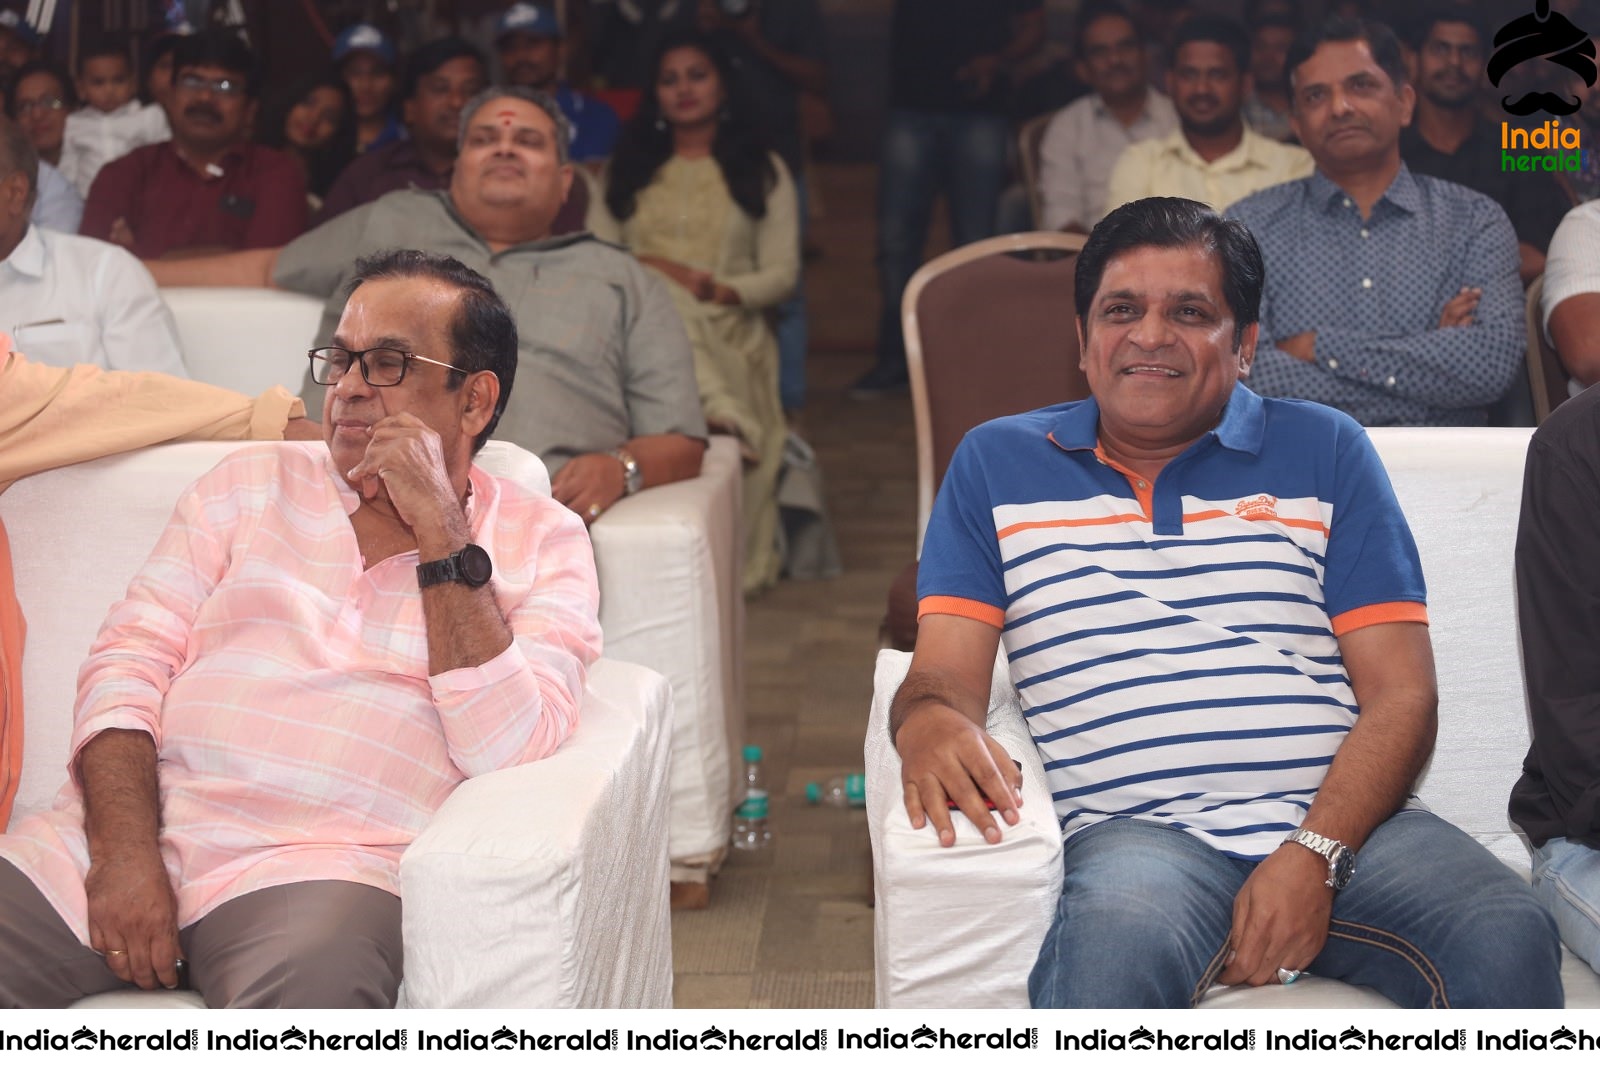 Legendary Comedy Actors Brahmanandam and Ali share a light moment